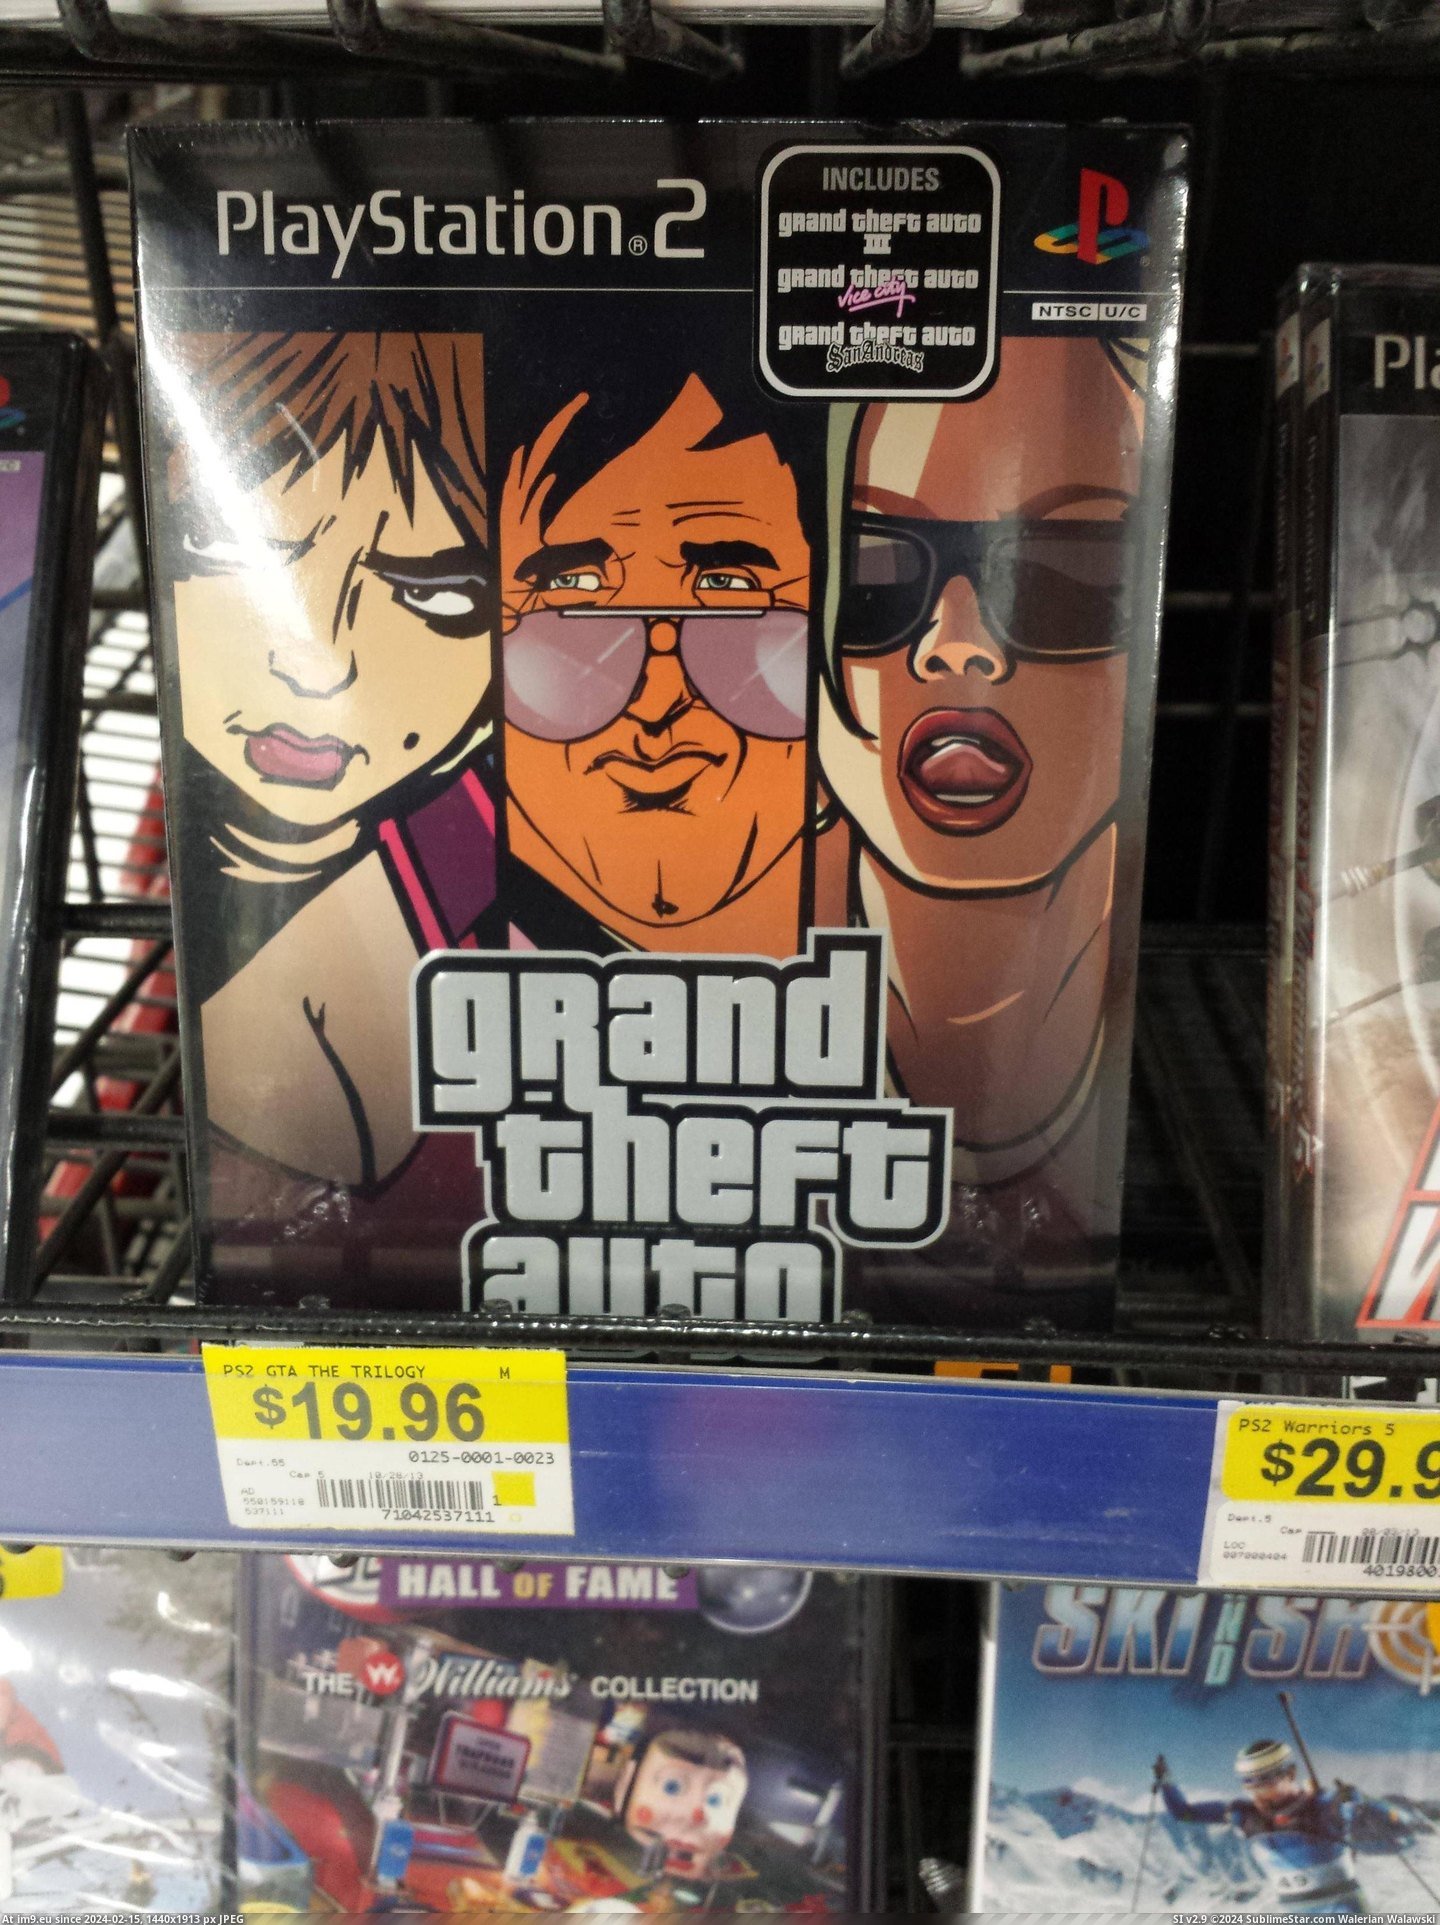 #Gaming #Games #Sold #Wal #Mart #Texas #Ps2 [Gaming] At a Wal-Mart in Texas. Didn't know ps2 games were still sold. Pic. (Изображение из альбом My r/GAMING favs))